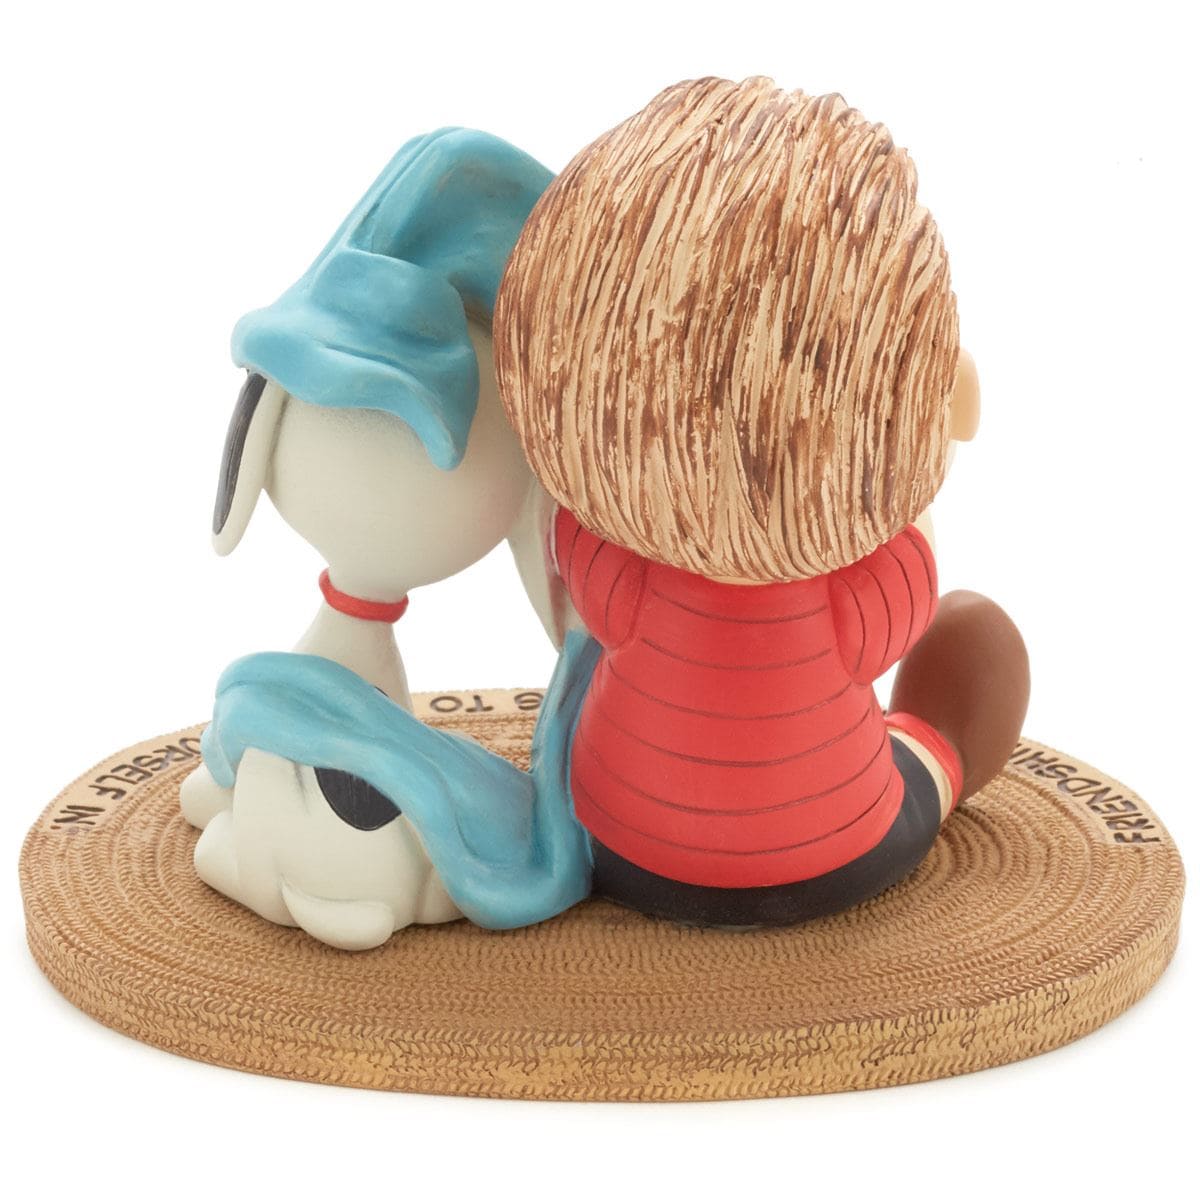 Peanuts Linus and Snoopy Wrapped in Friendship Mini Figurine